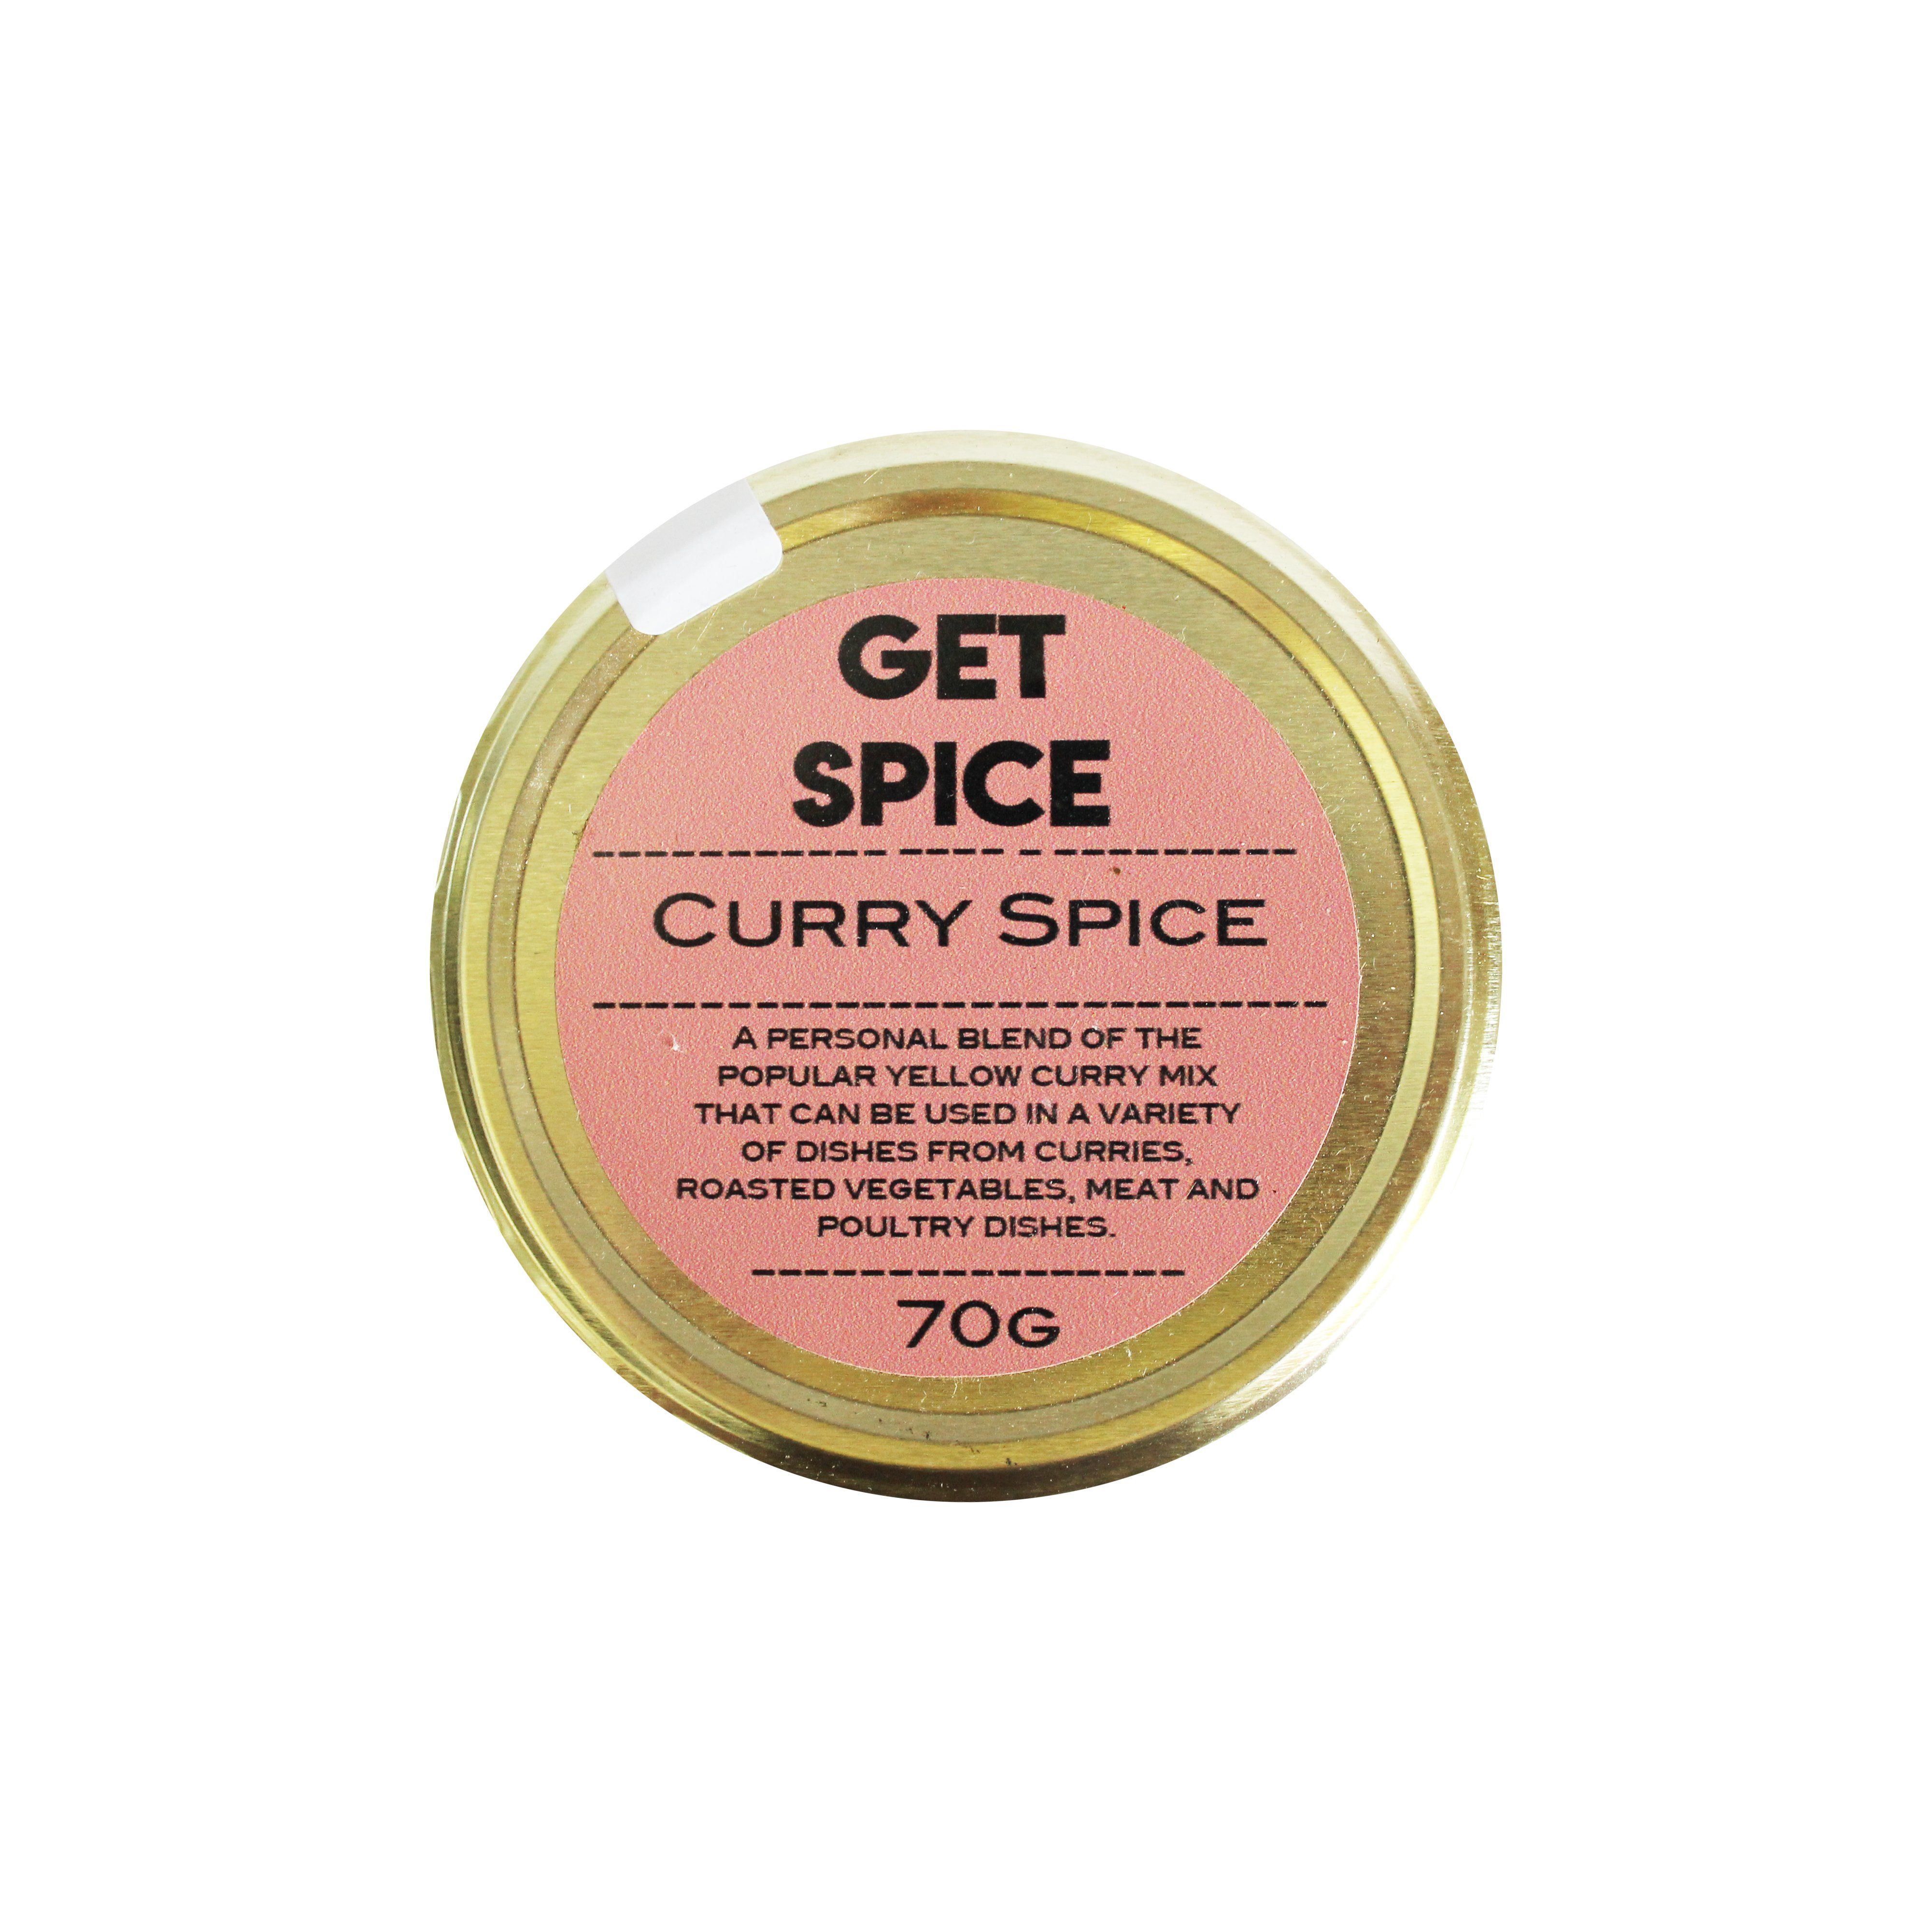 Get Spice Curry Spice 70g Salts, Herbs & Spices Get Spice 